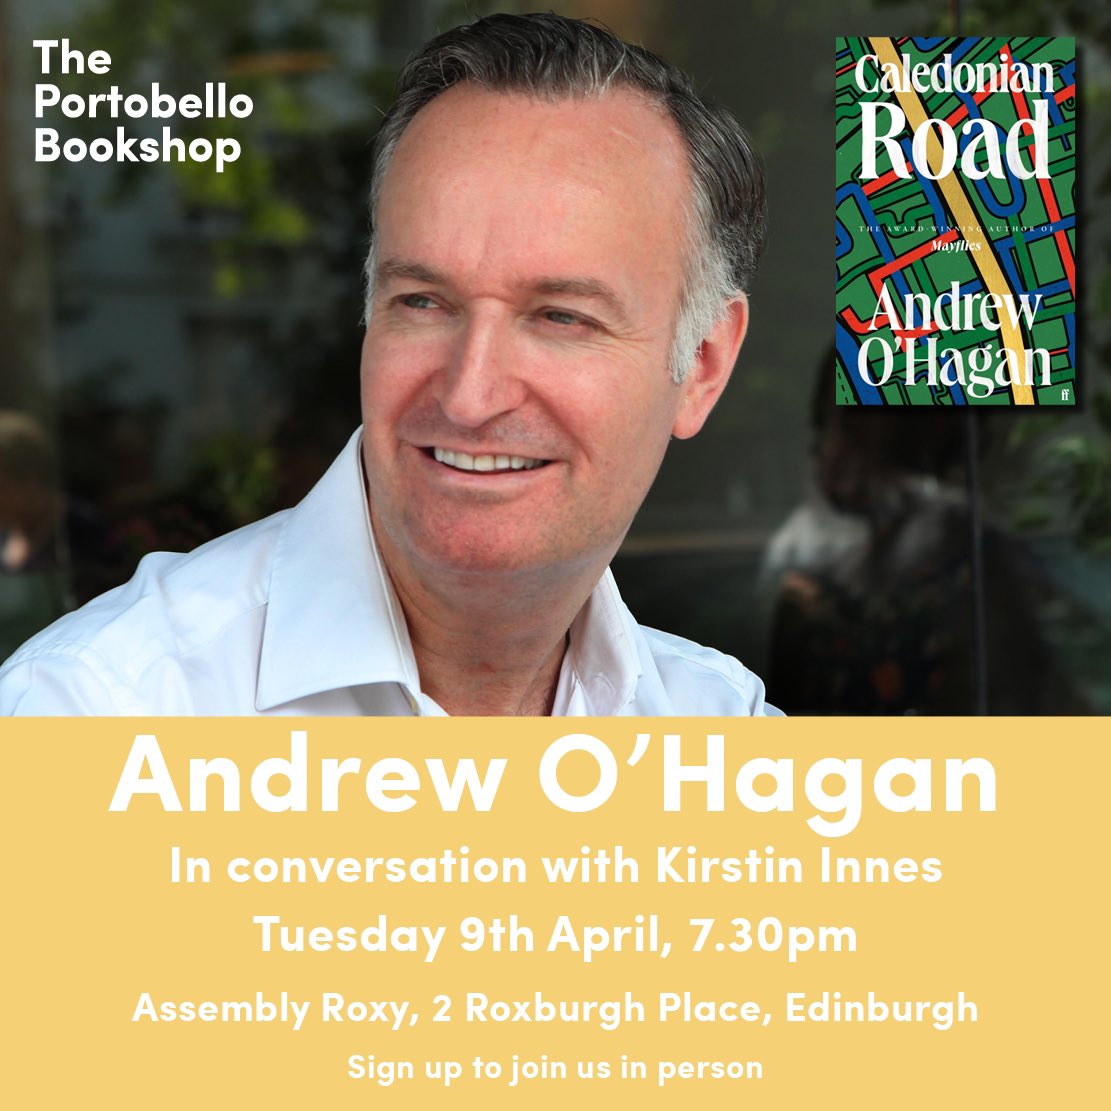 TOMORROW! We can’t wait to launch Andrew O’Hagan’s eagerly anticipated novel, Caledonian Road, at Assembly Roxy, chaired by the wonderful Kirstin Innes. Hope to see you there! theportobellobookshop.com/events/andrew-…